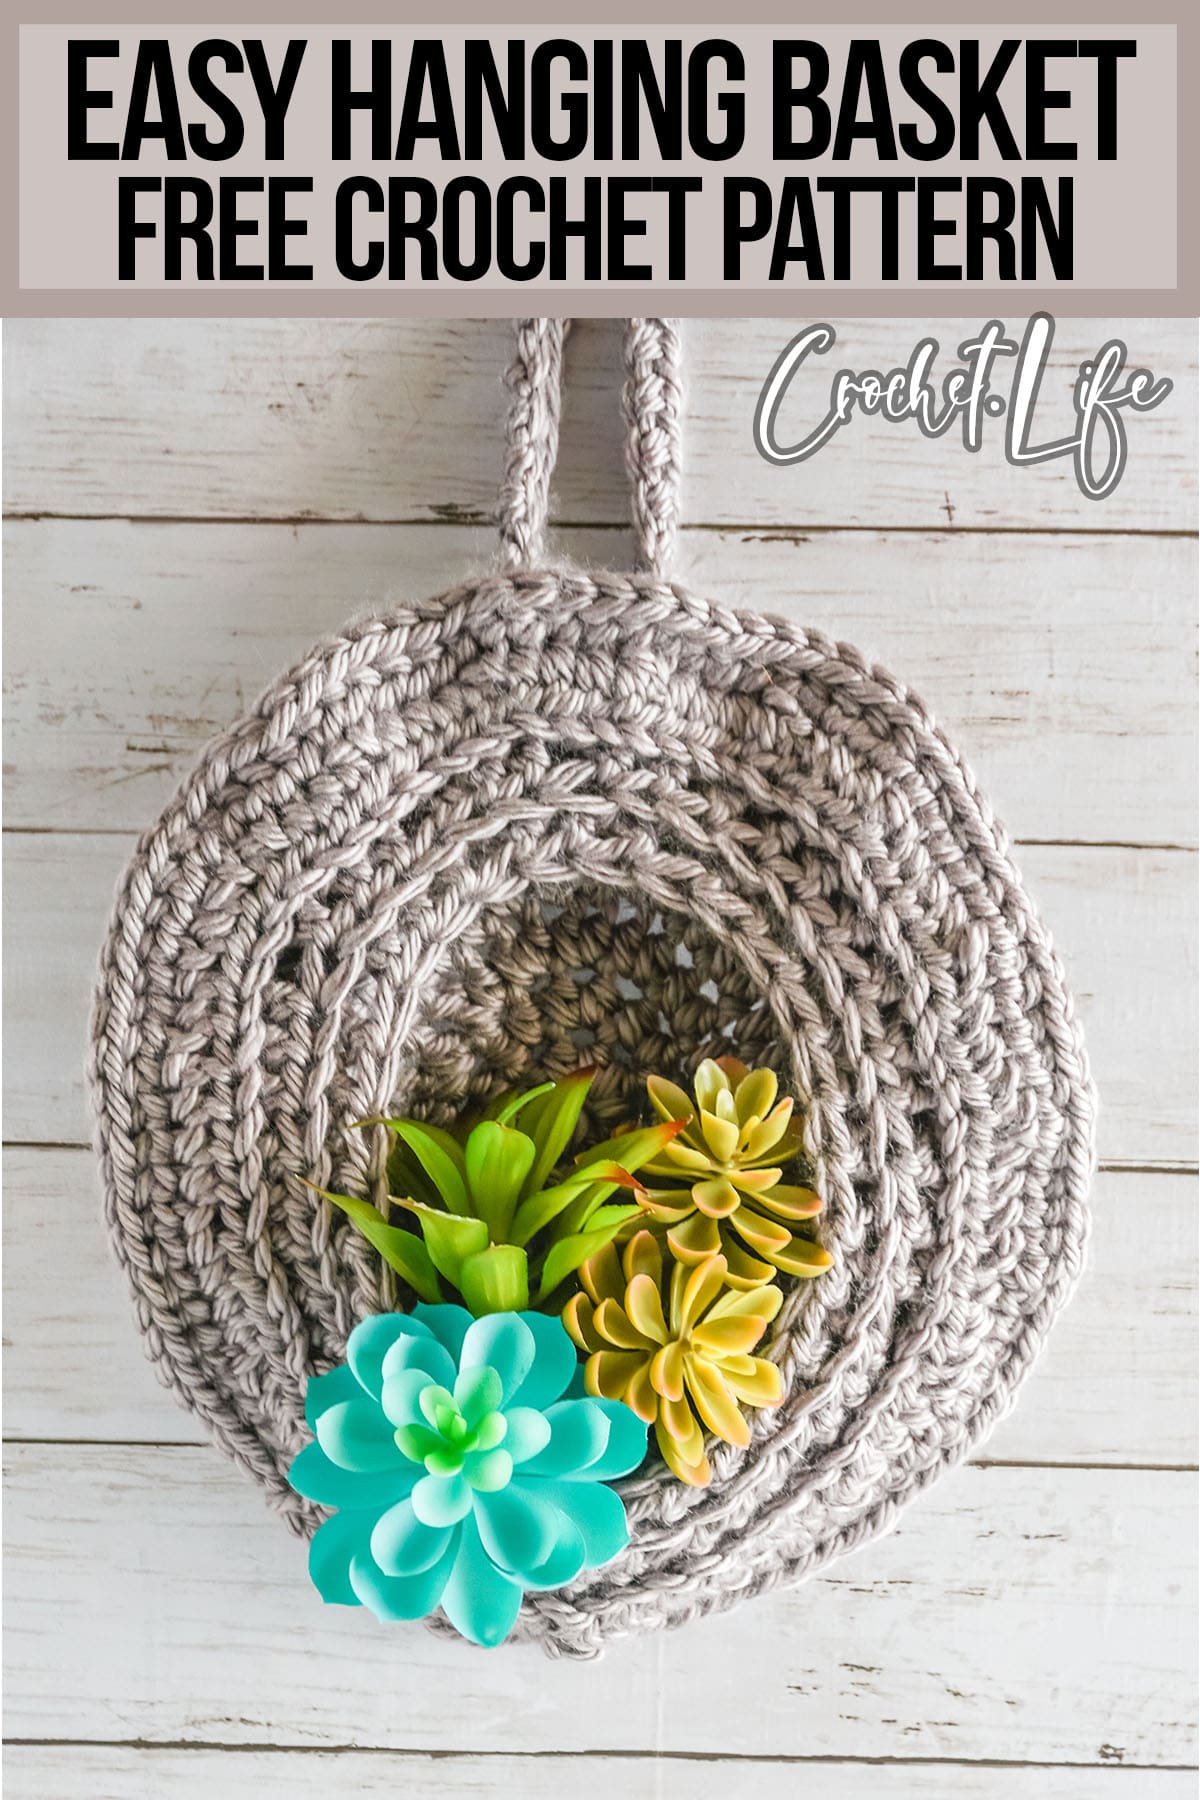 free pattern crochet hanging basket with text which reads easy hanging basket free crochet pattern